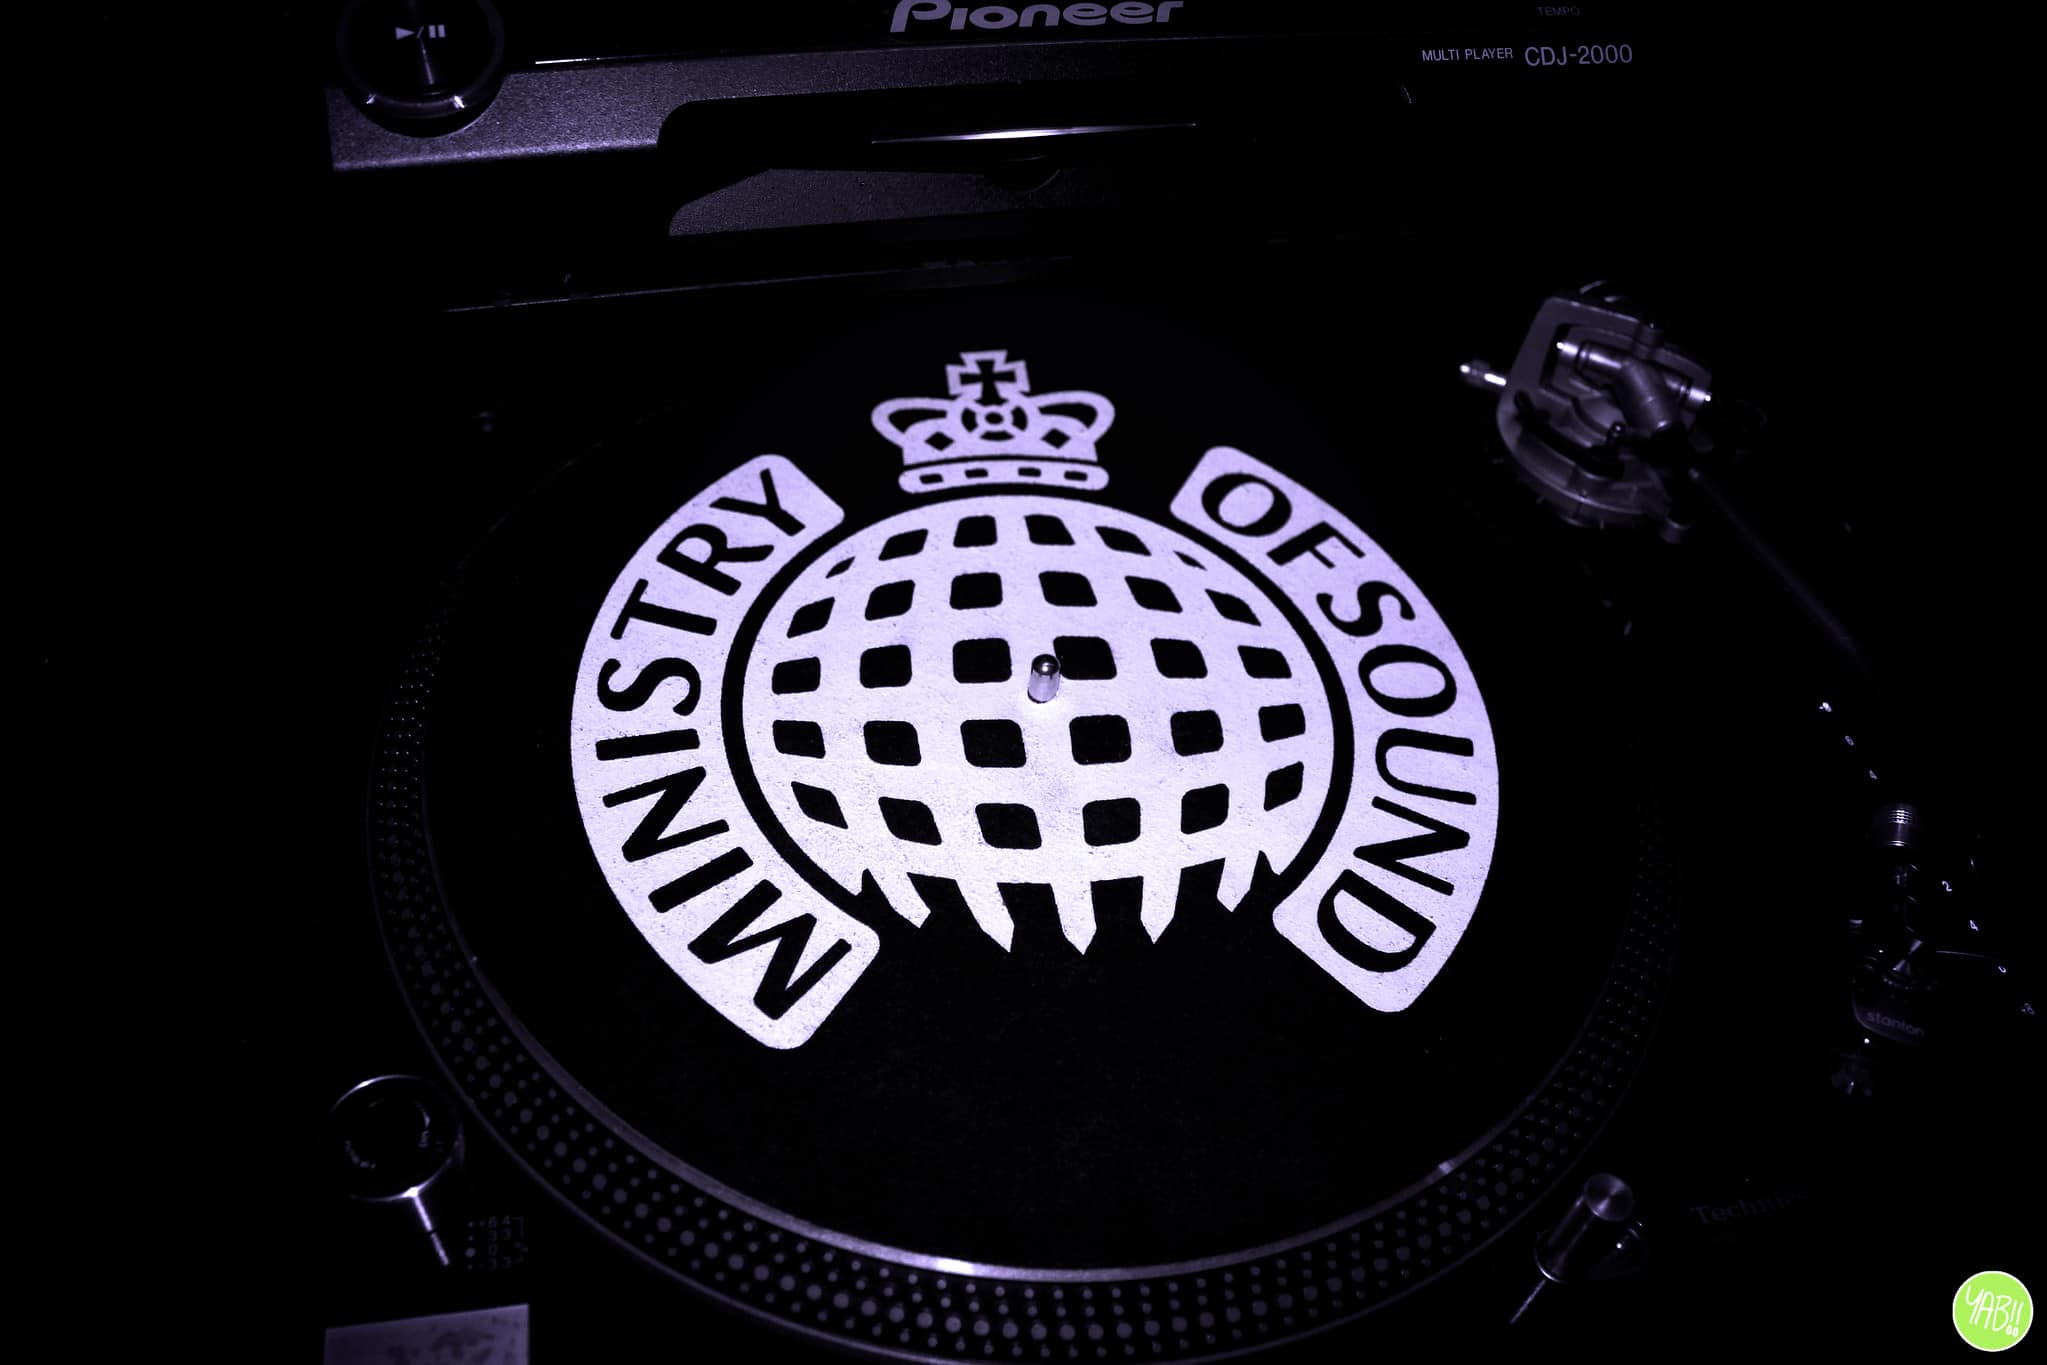 Ministry of Sound Club in London closed until further notice